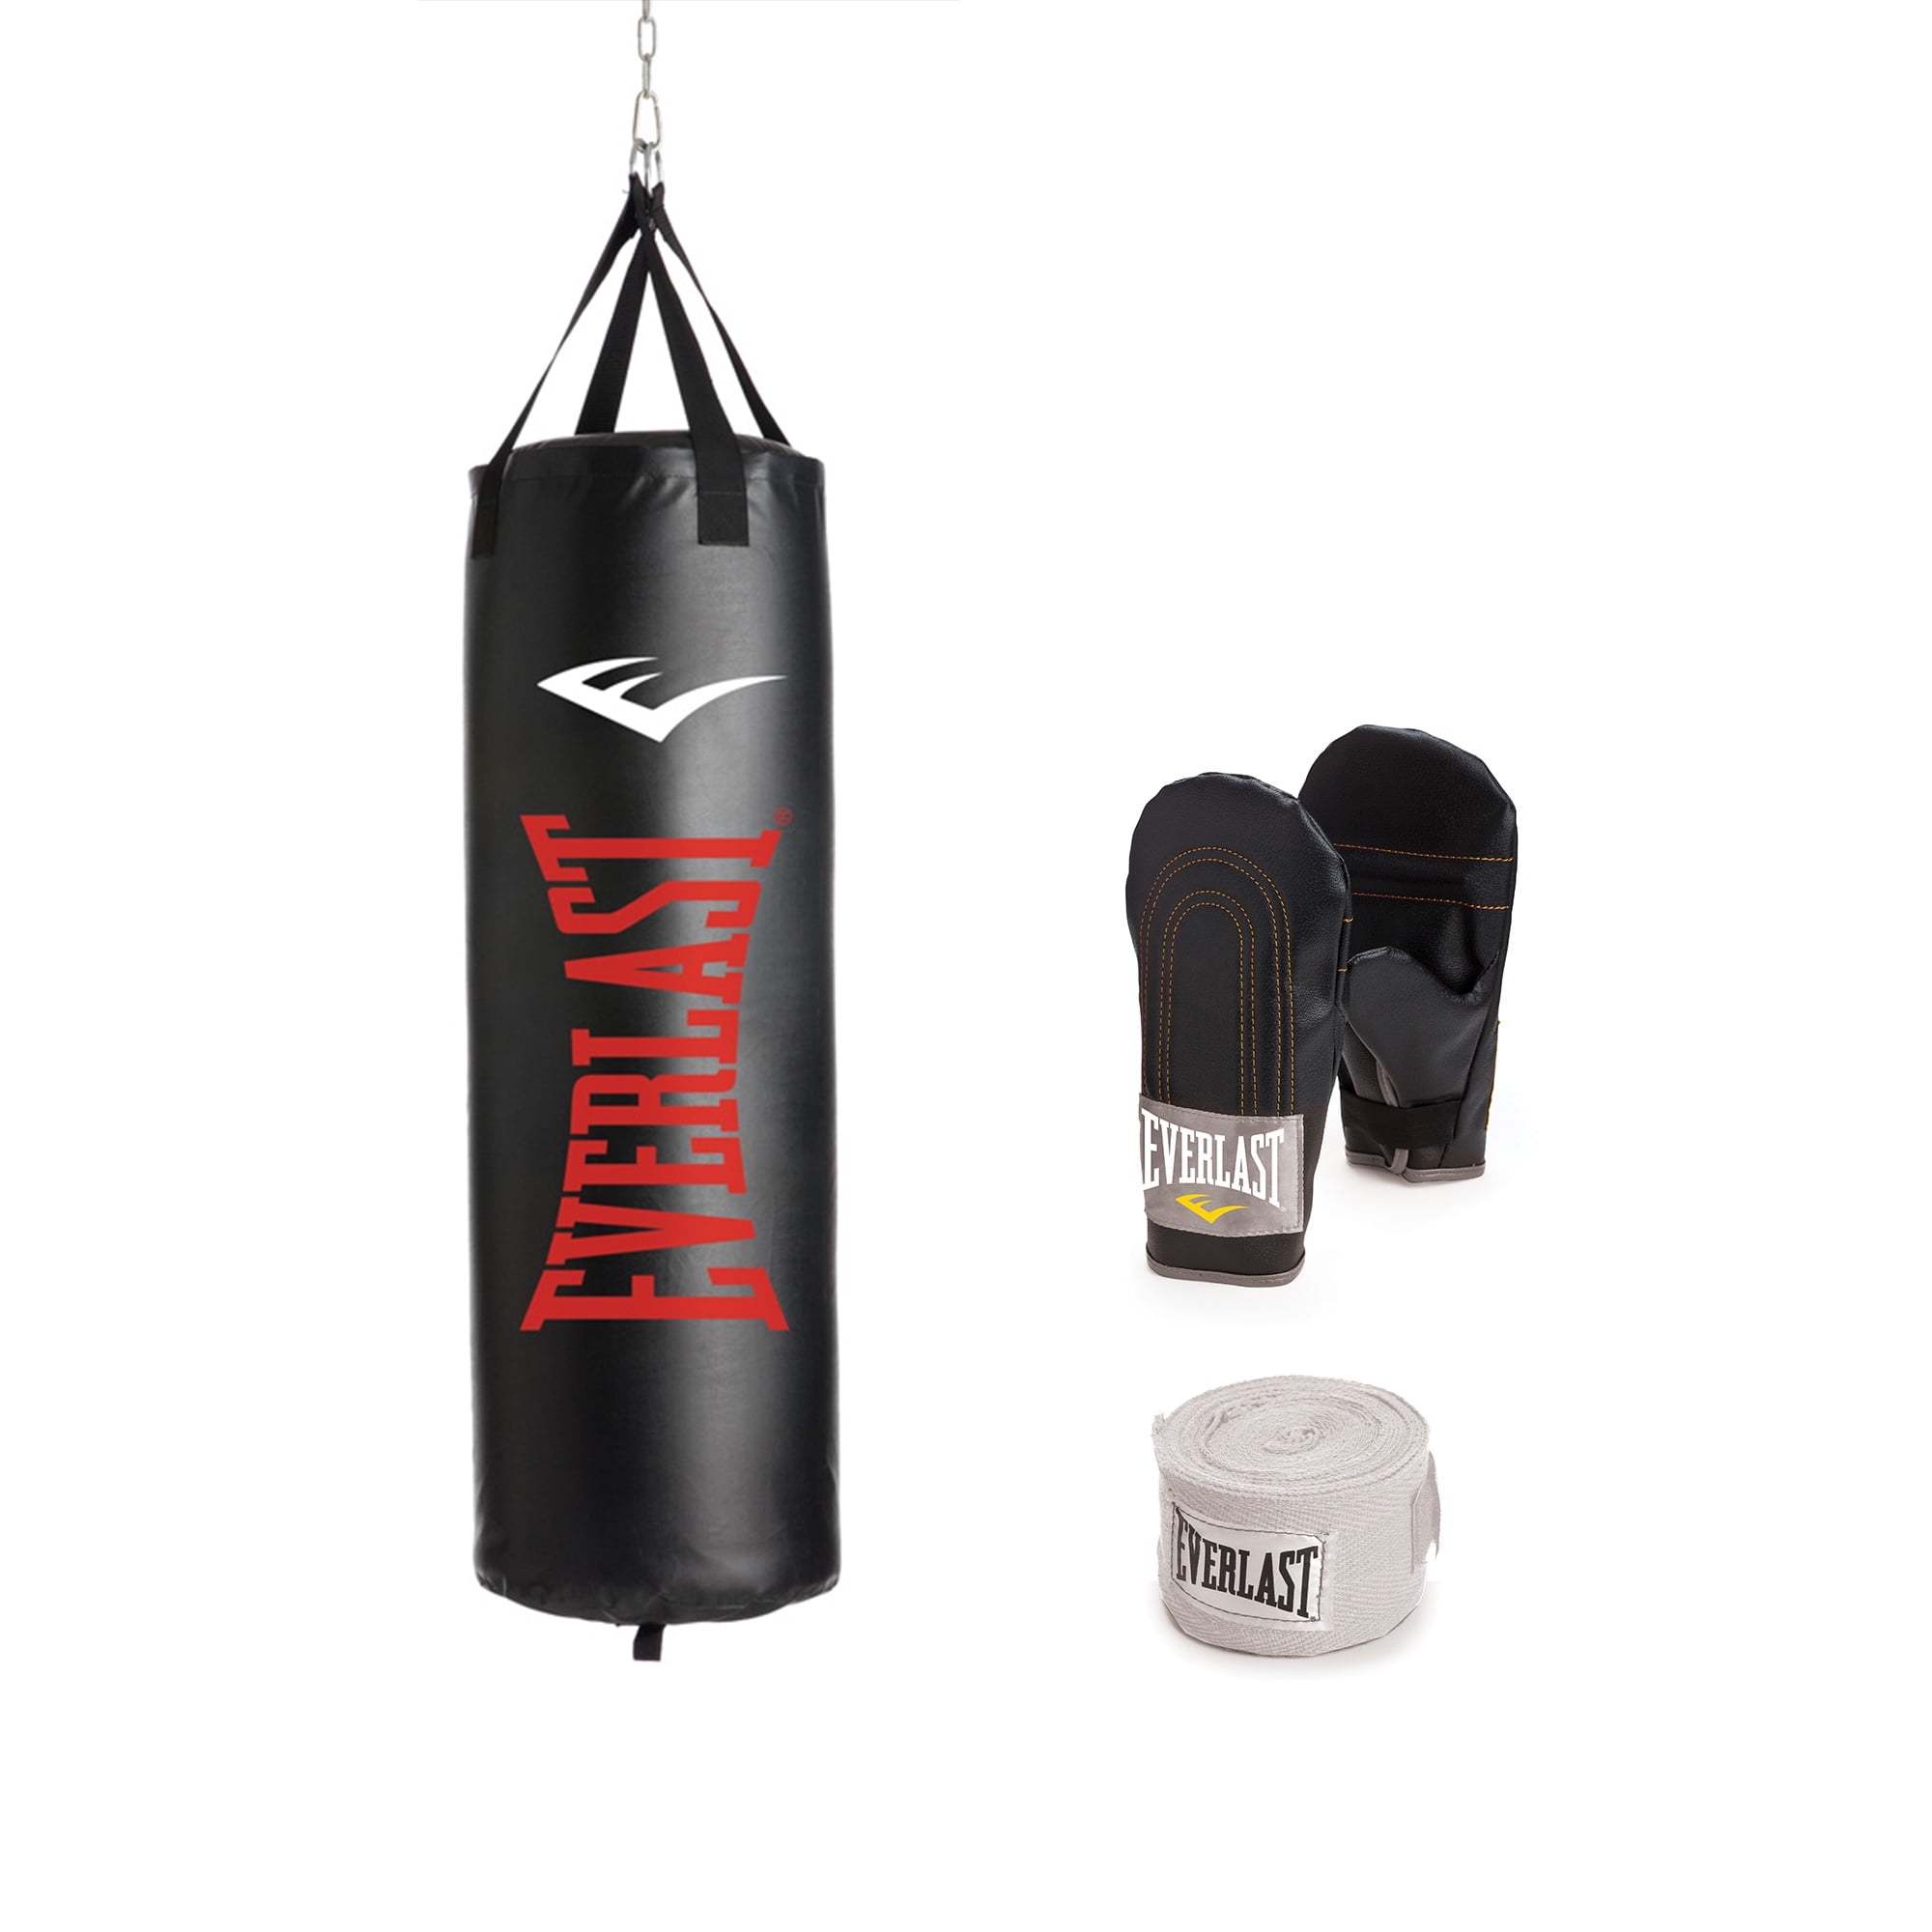 Everlast Fit Powercore Free Standing Punch Bag and Accessories H 165 W 54 D54 cm 